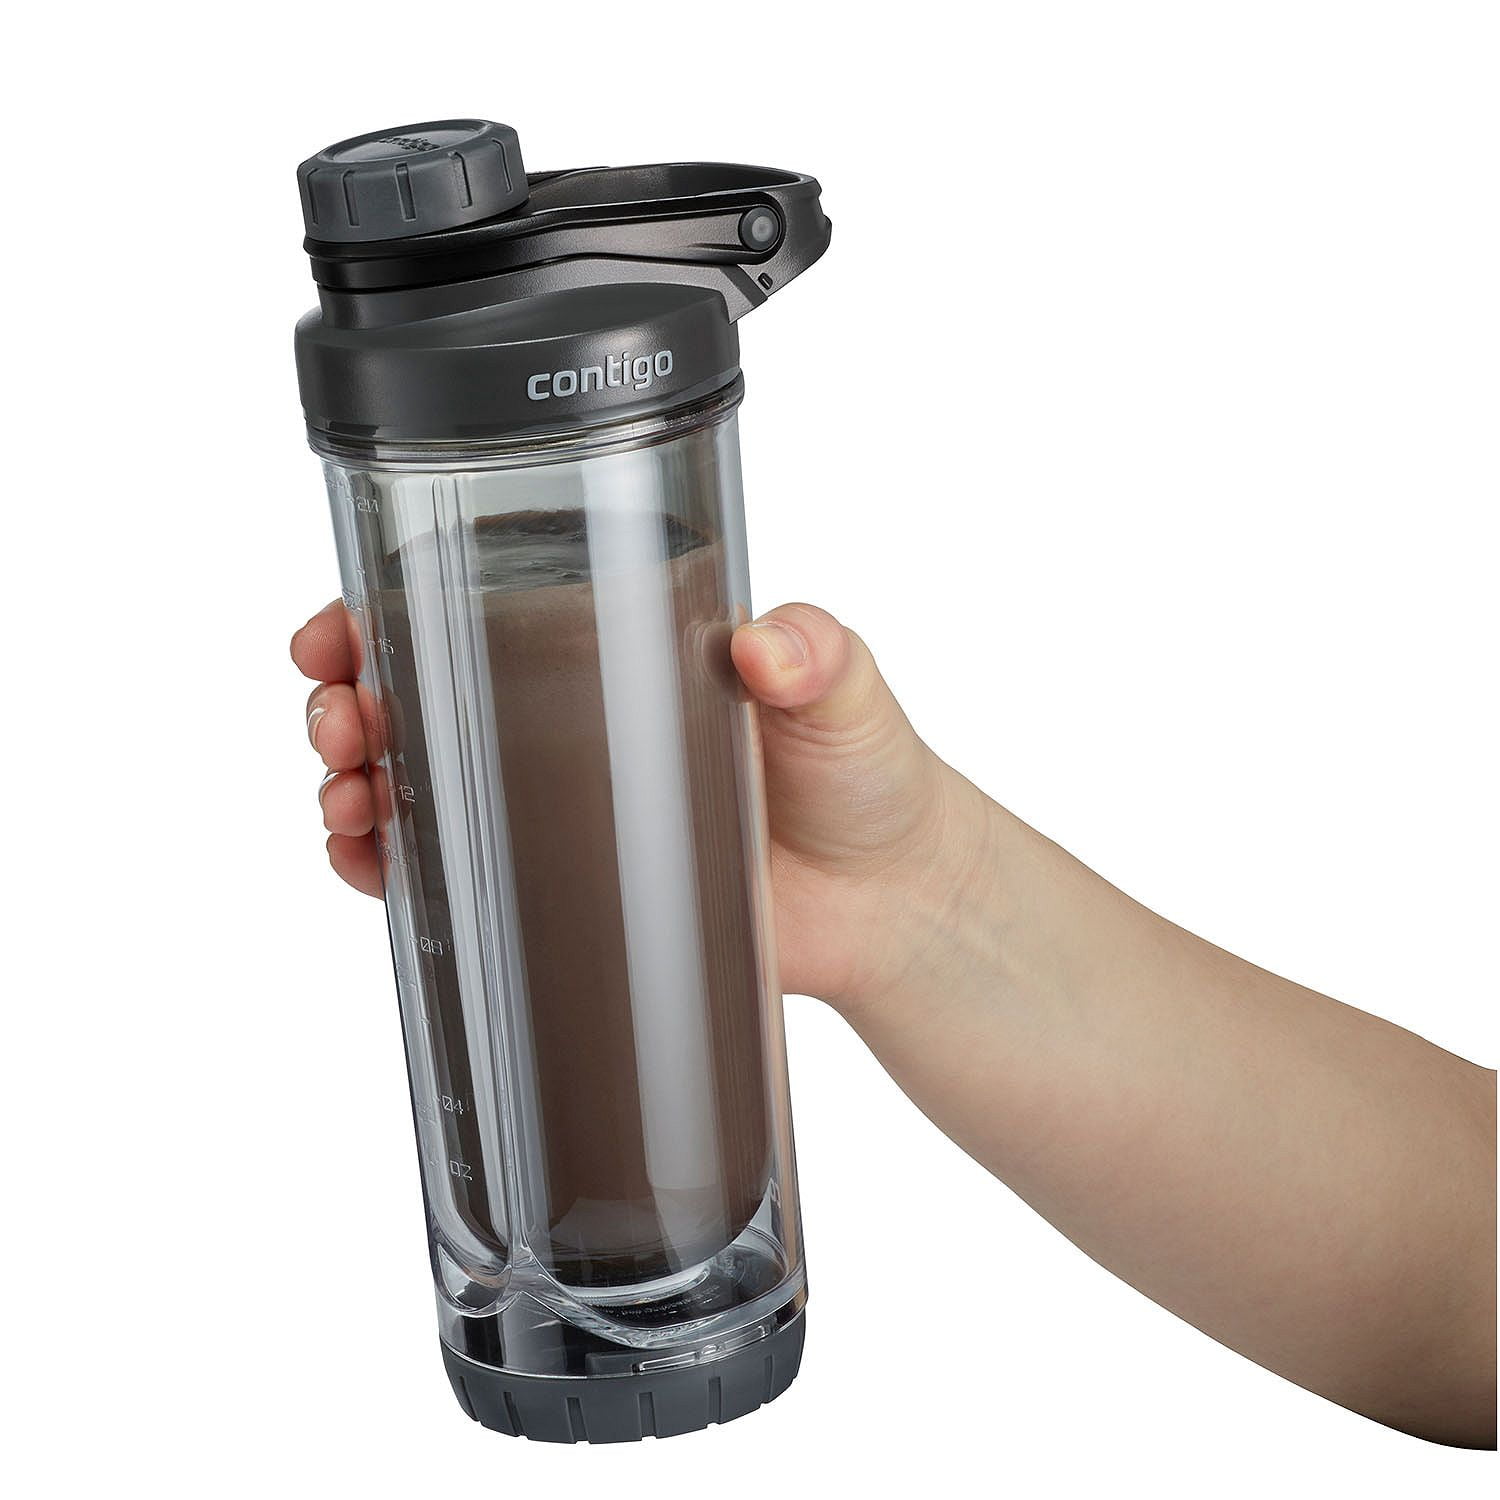 Contigo Fit Shake & Go 2.0 Shaker Bottle with Leak-Proof Lid, 28oz Gym  Water Bottle with Whisk and C…See more Contigo Fit Shake & Go 2.0 Shaker  Bottle